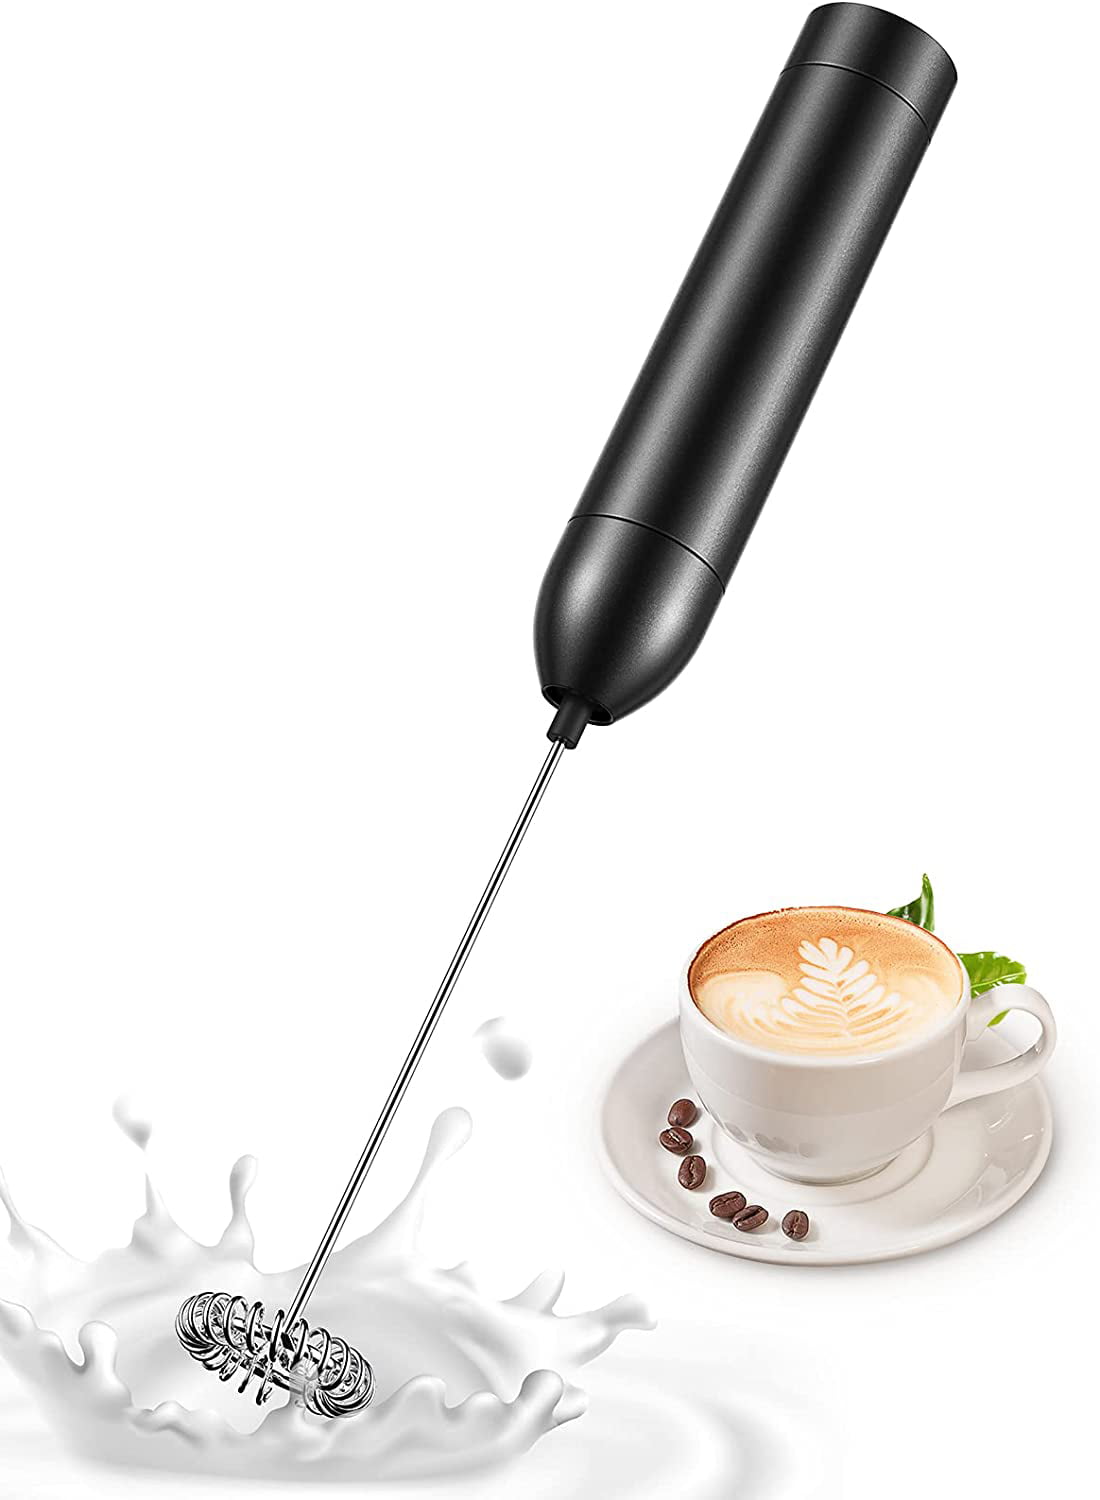 Mini Manual Battery Operated Milk Frother With Stand - CPJC0324SG -  IdeaStage Promotional Products